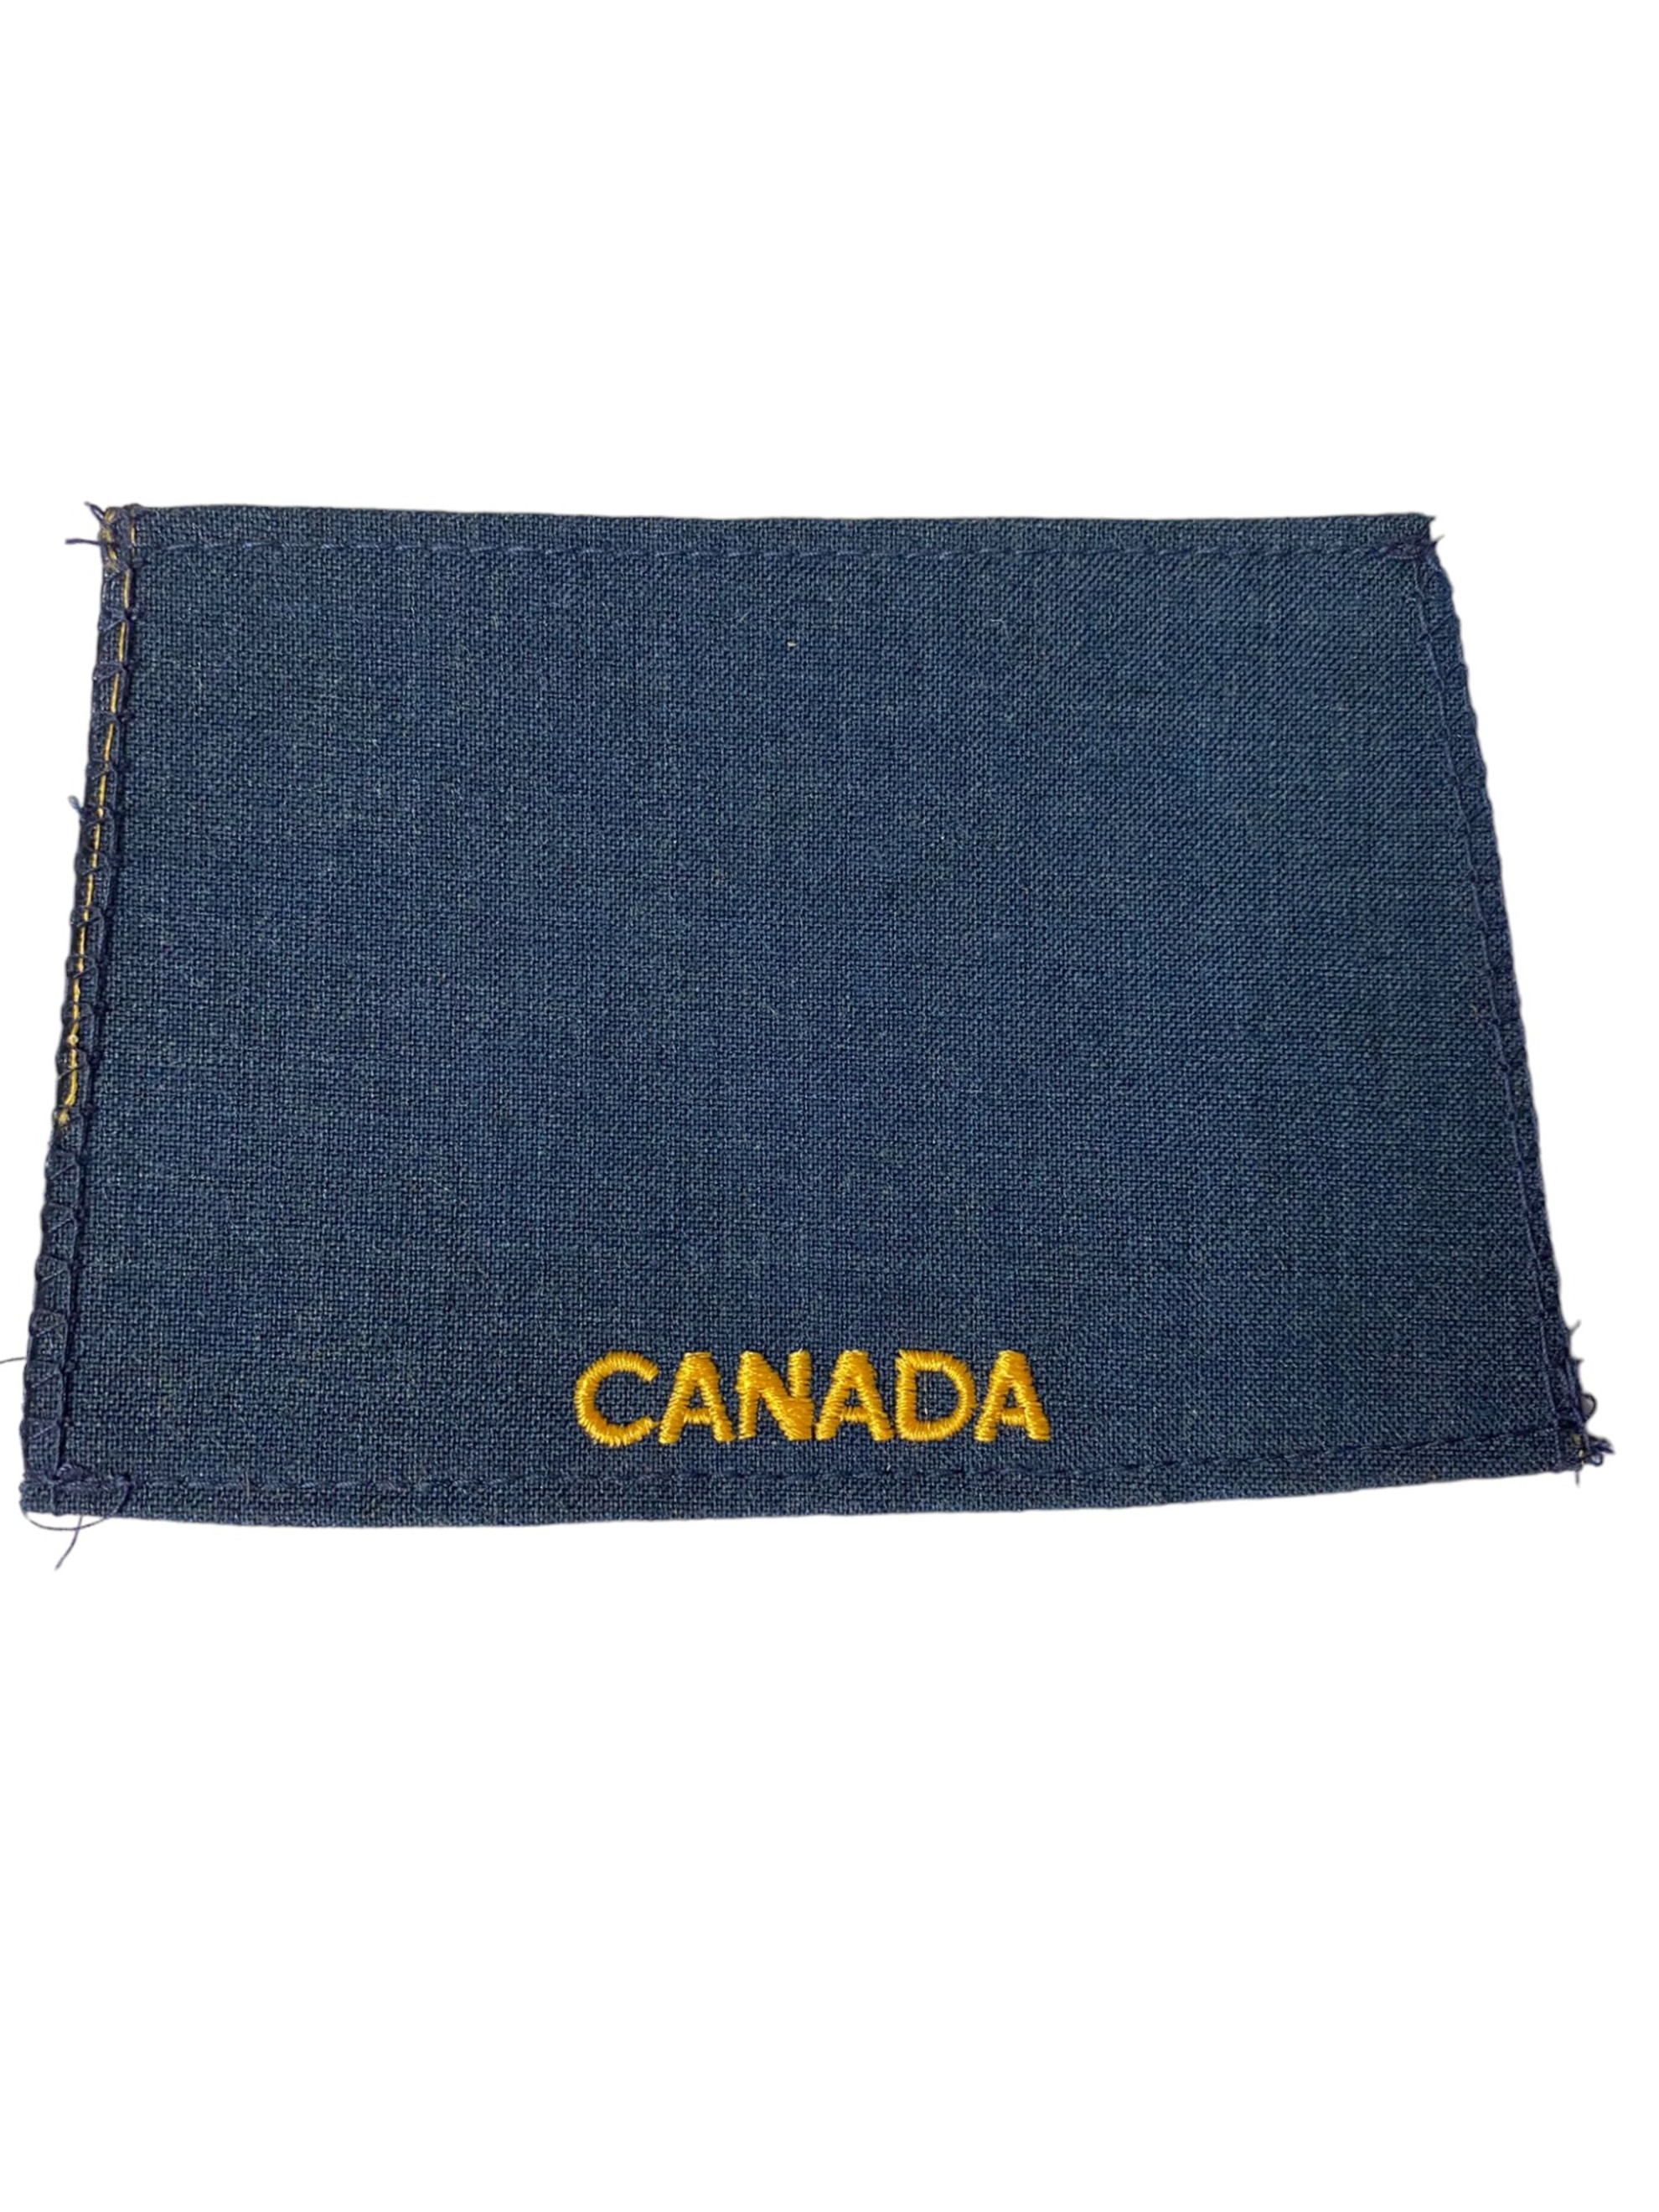 Canadian Armed Forces Rank Epaulets Air Force - Blank - Unsewn